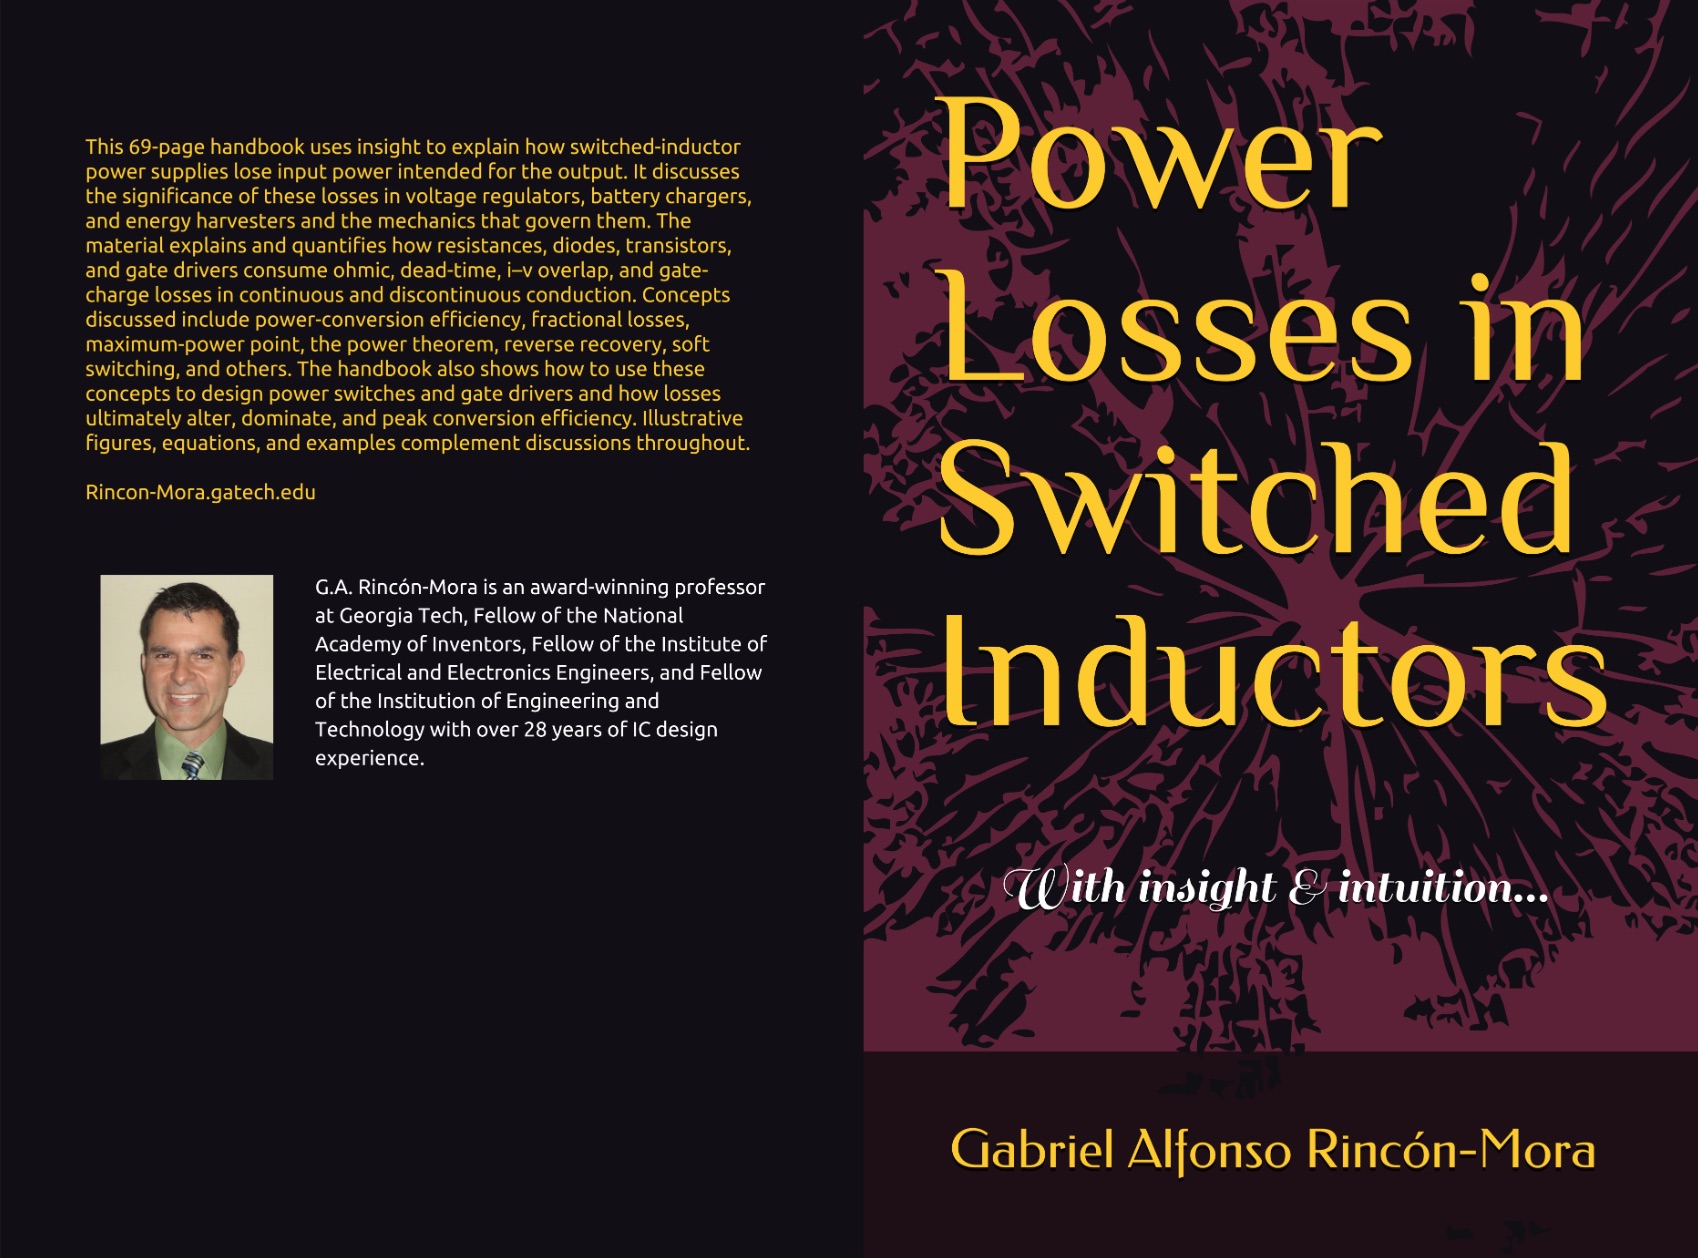 Power Losses in Switched Inductors